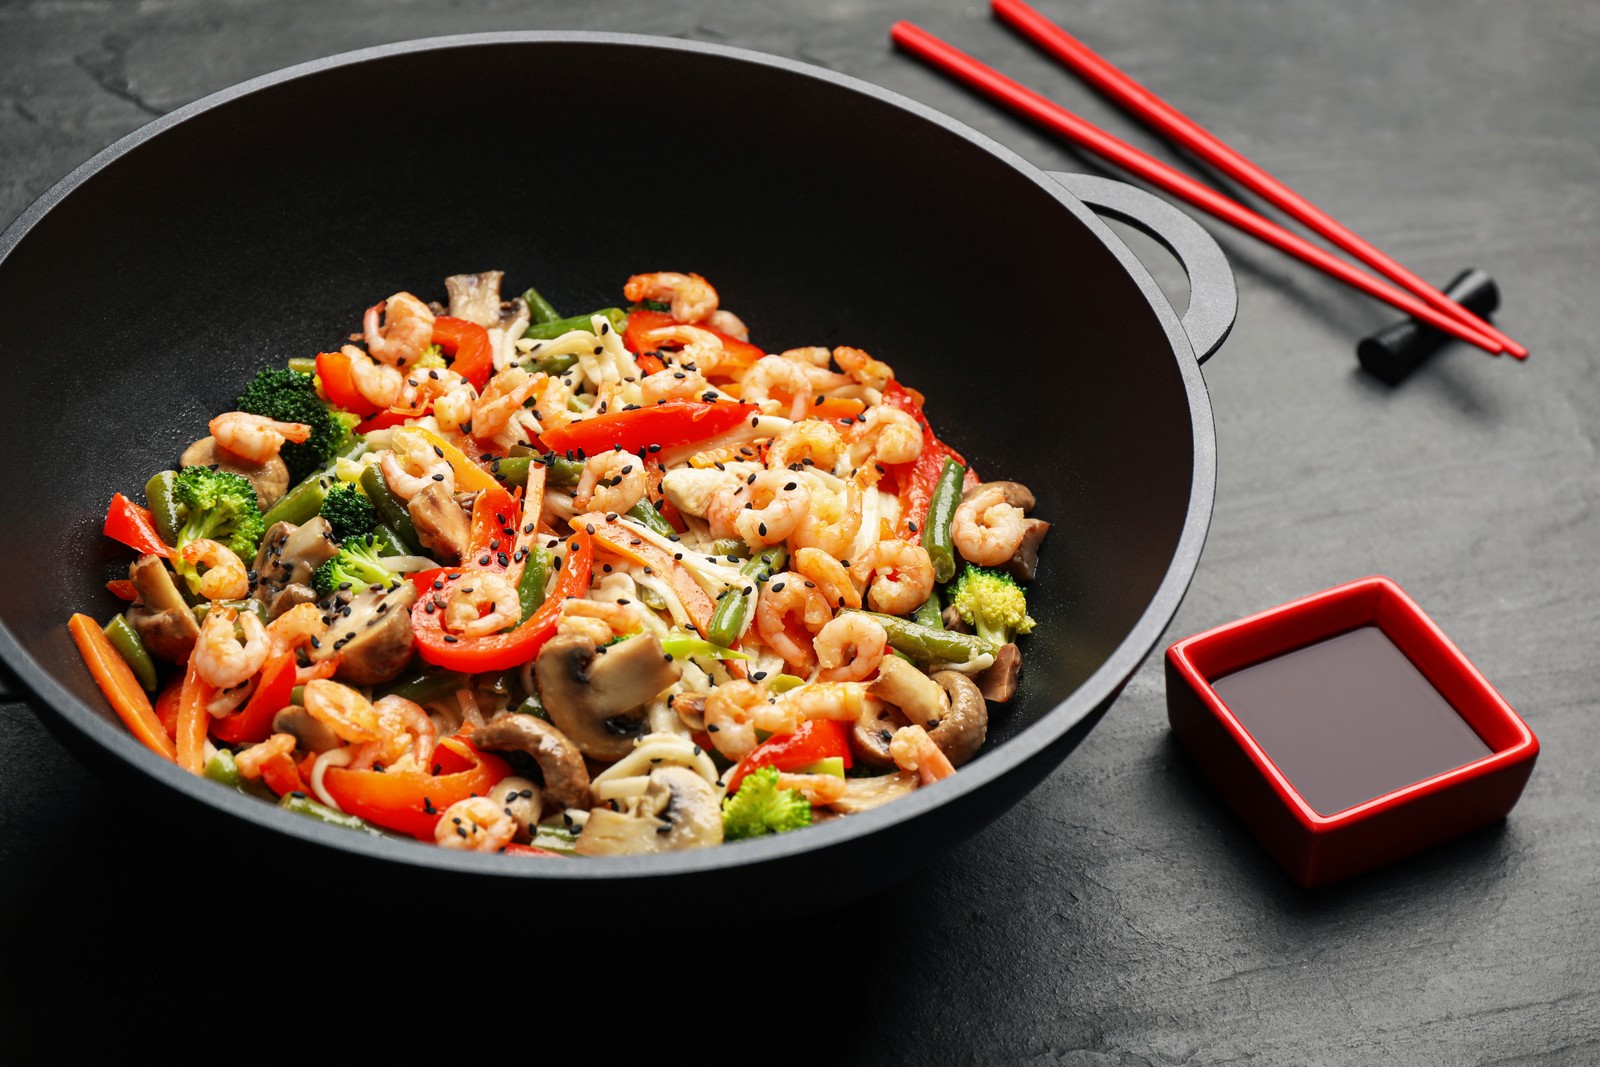 Photo of stir fried noodles with mushrooms, shrimps and vegetables in wok on black table, closeup